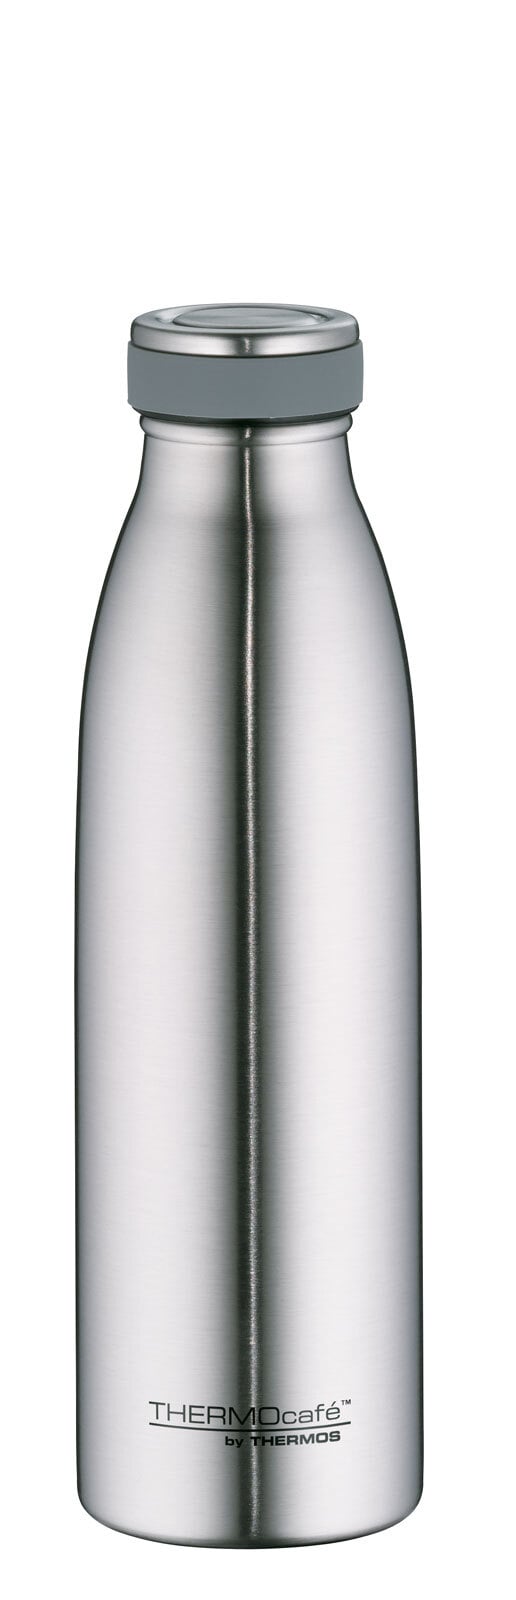 THERMOcafé by THERMOS Isolierflasche BOTTLE 500 ml Edelstahl silberfarbig